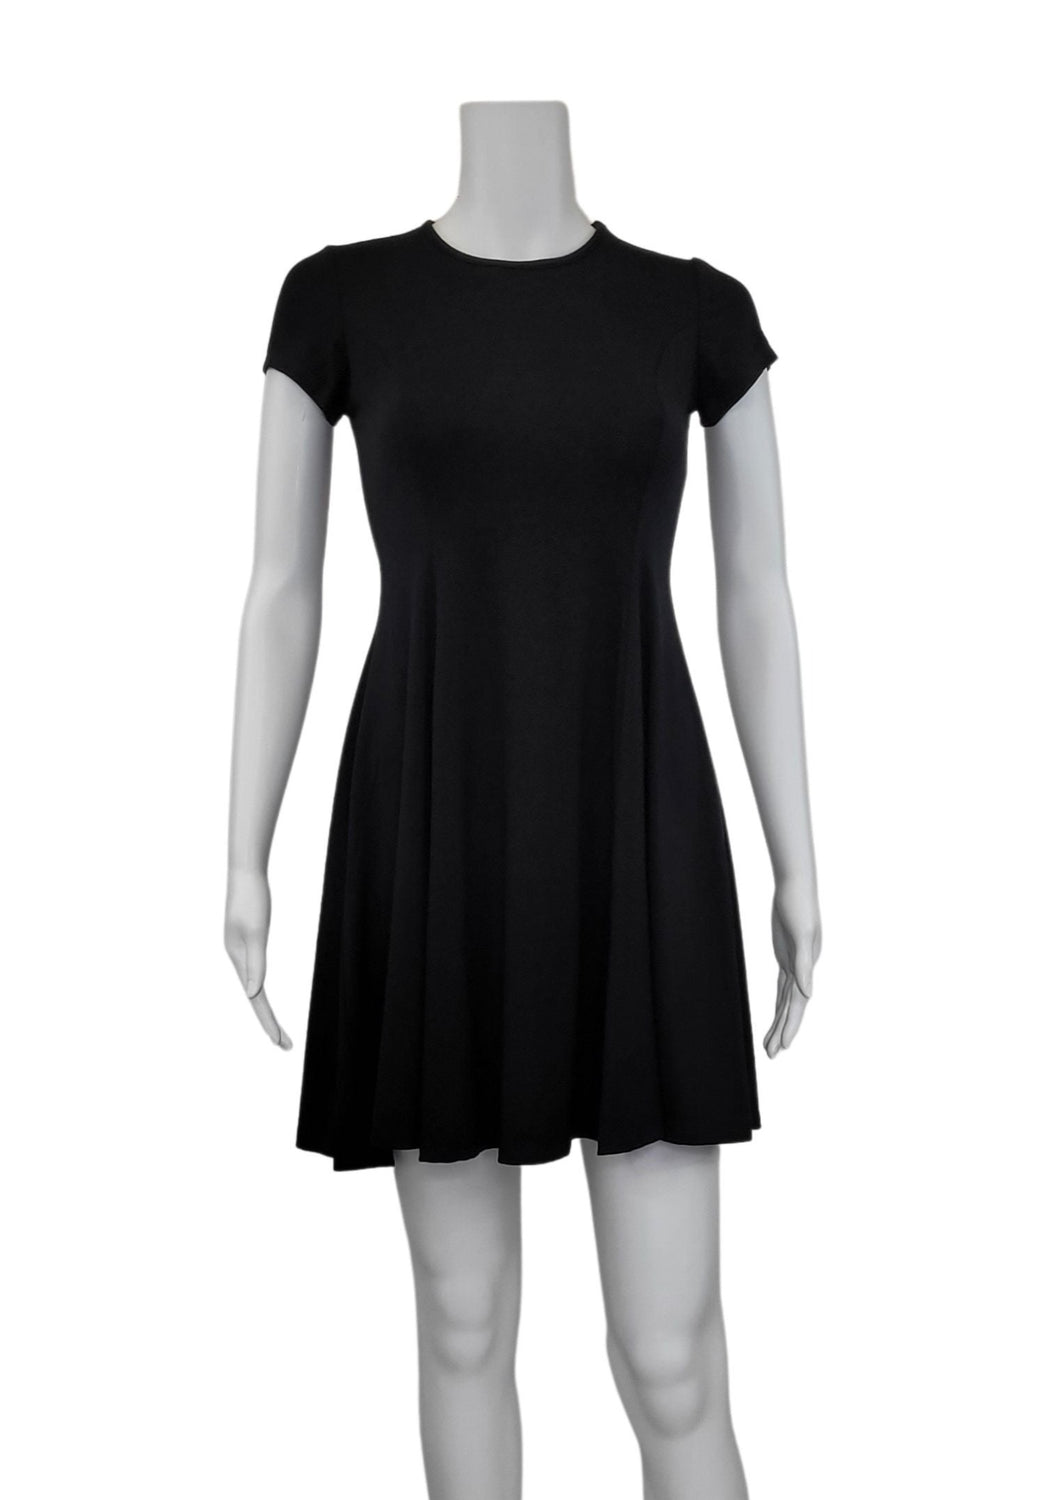  The Black Bamboo Swing Dress is a simple and elegant style with a luxurious look and feel. A compliment to all body shapes with its princess line fit, round neck and short sleeve. Proudly made in Canada 92% rayon from bamboo 8% Spandex  Eco-Essentials black $75.00